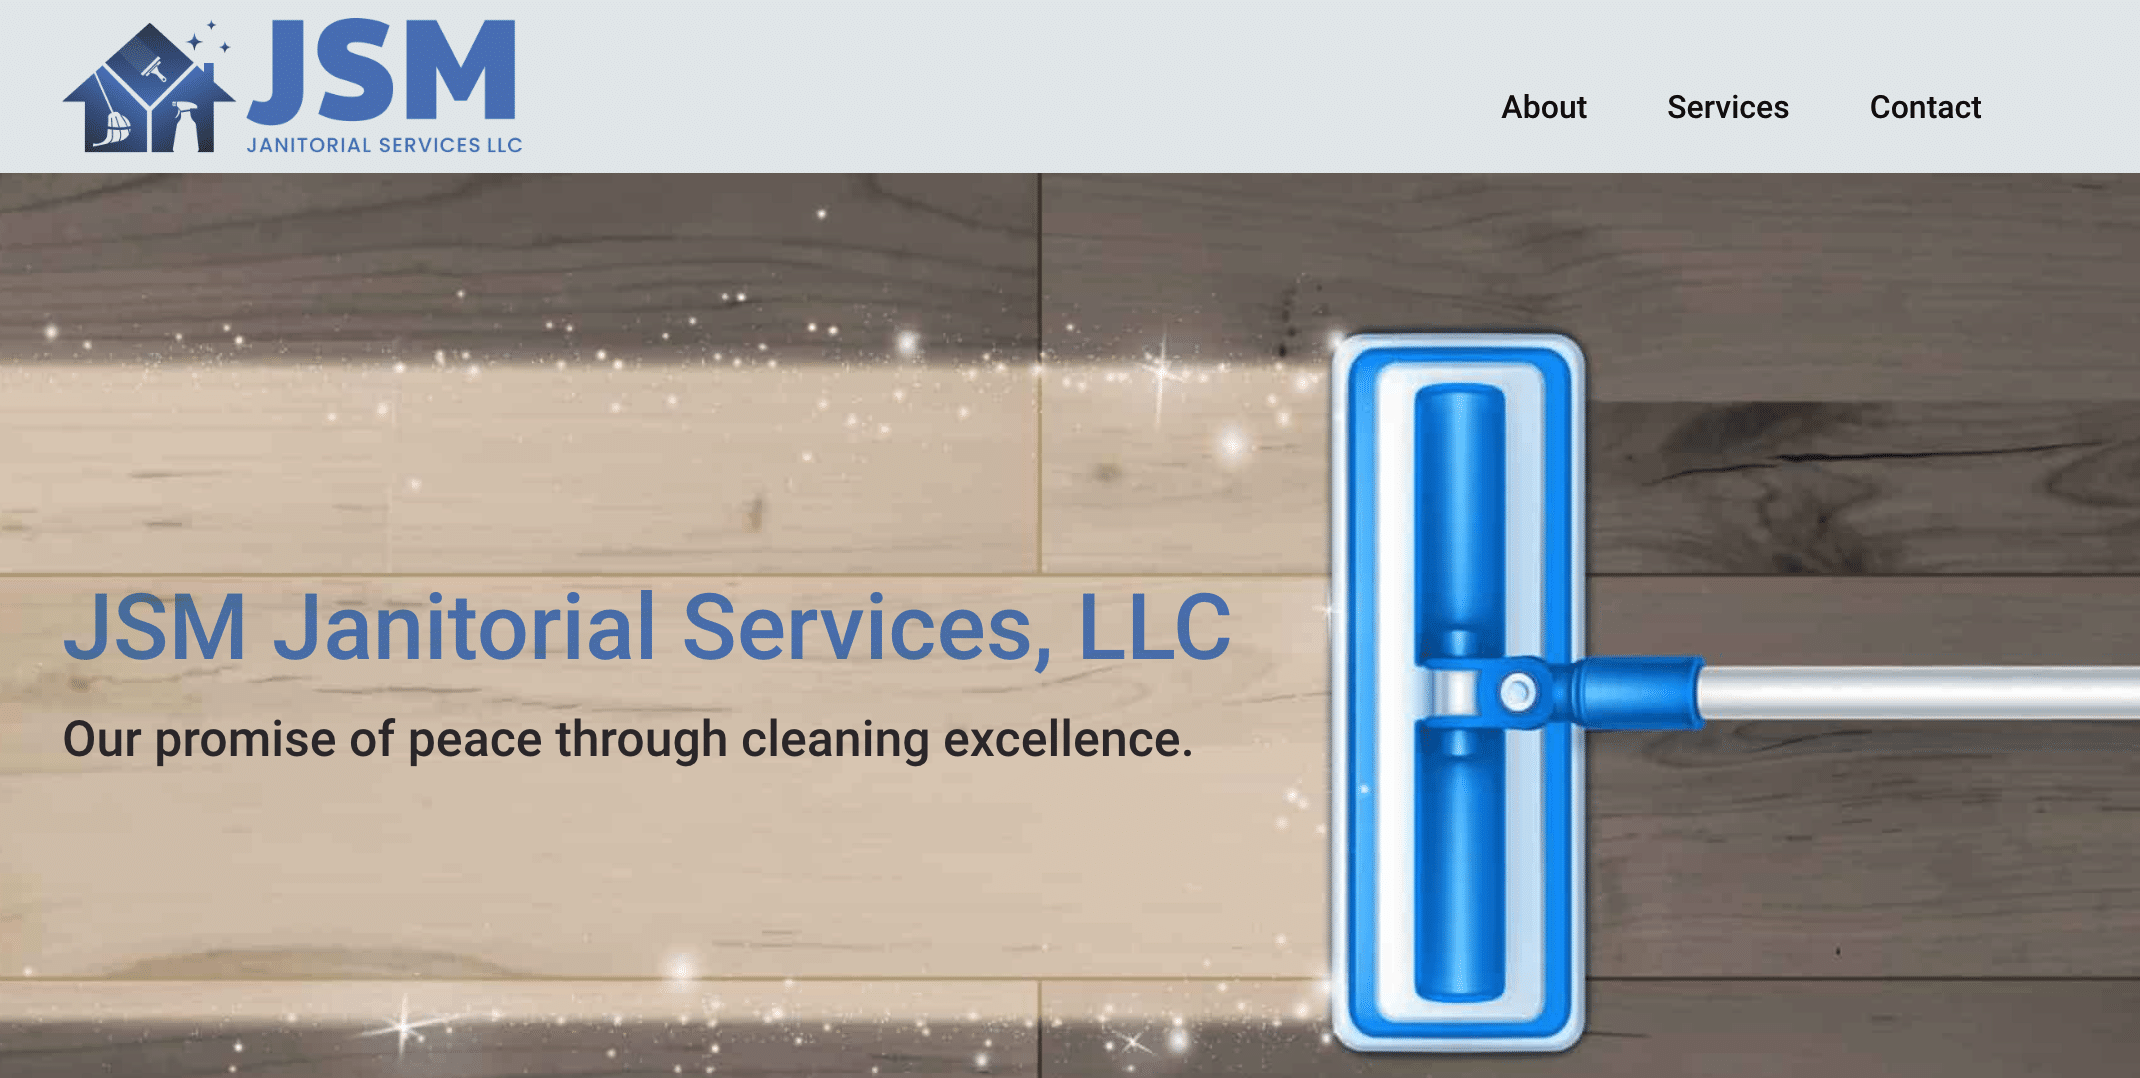 janitorial services website